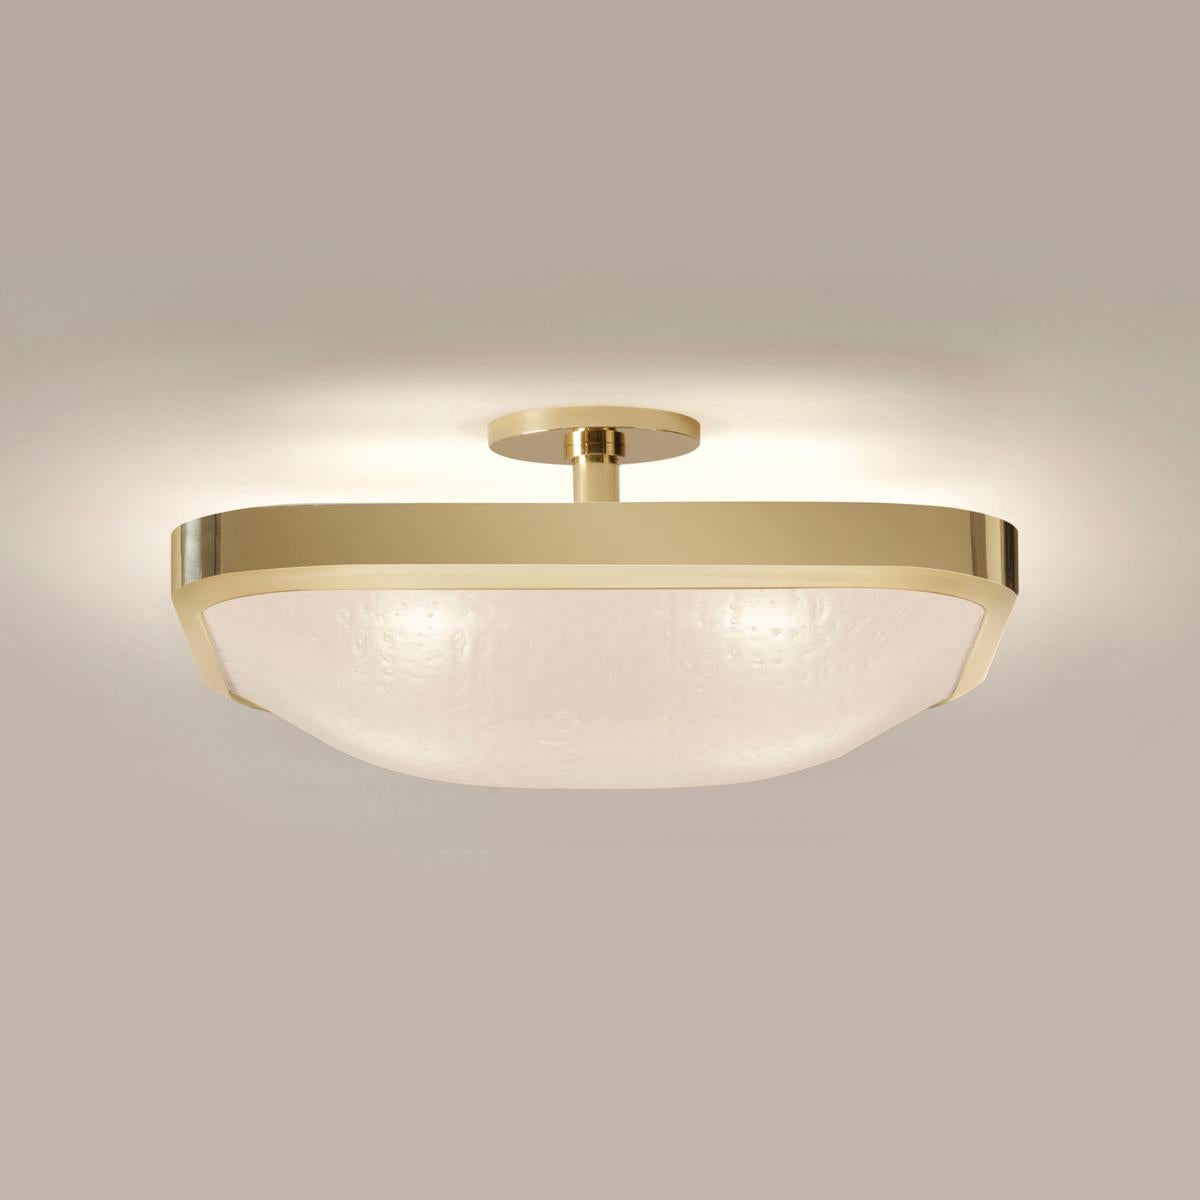 Uno Square Ceiling Light by Gaspare Asaro-Satin Brass Finish In New Condition For Sale In New York, NY